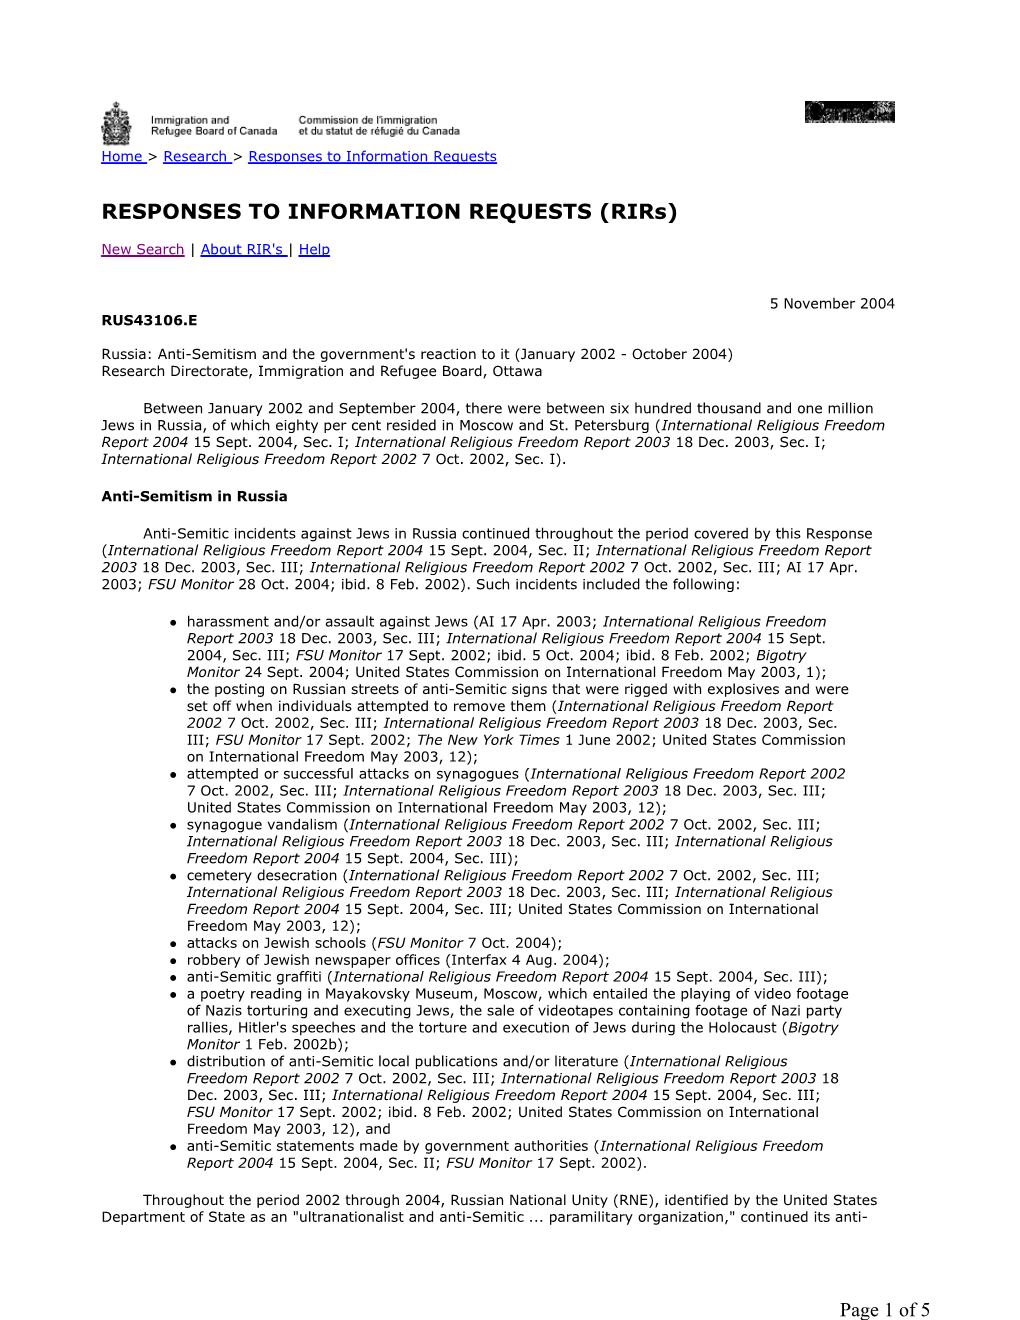 Russia: Anti-Semitism and the Government's Reaction to It (January 2002 - October 2004) Research Directorate, Immigration and Refugee Board, Ottawa